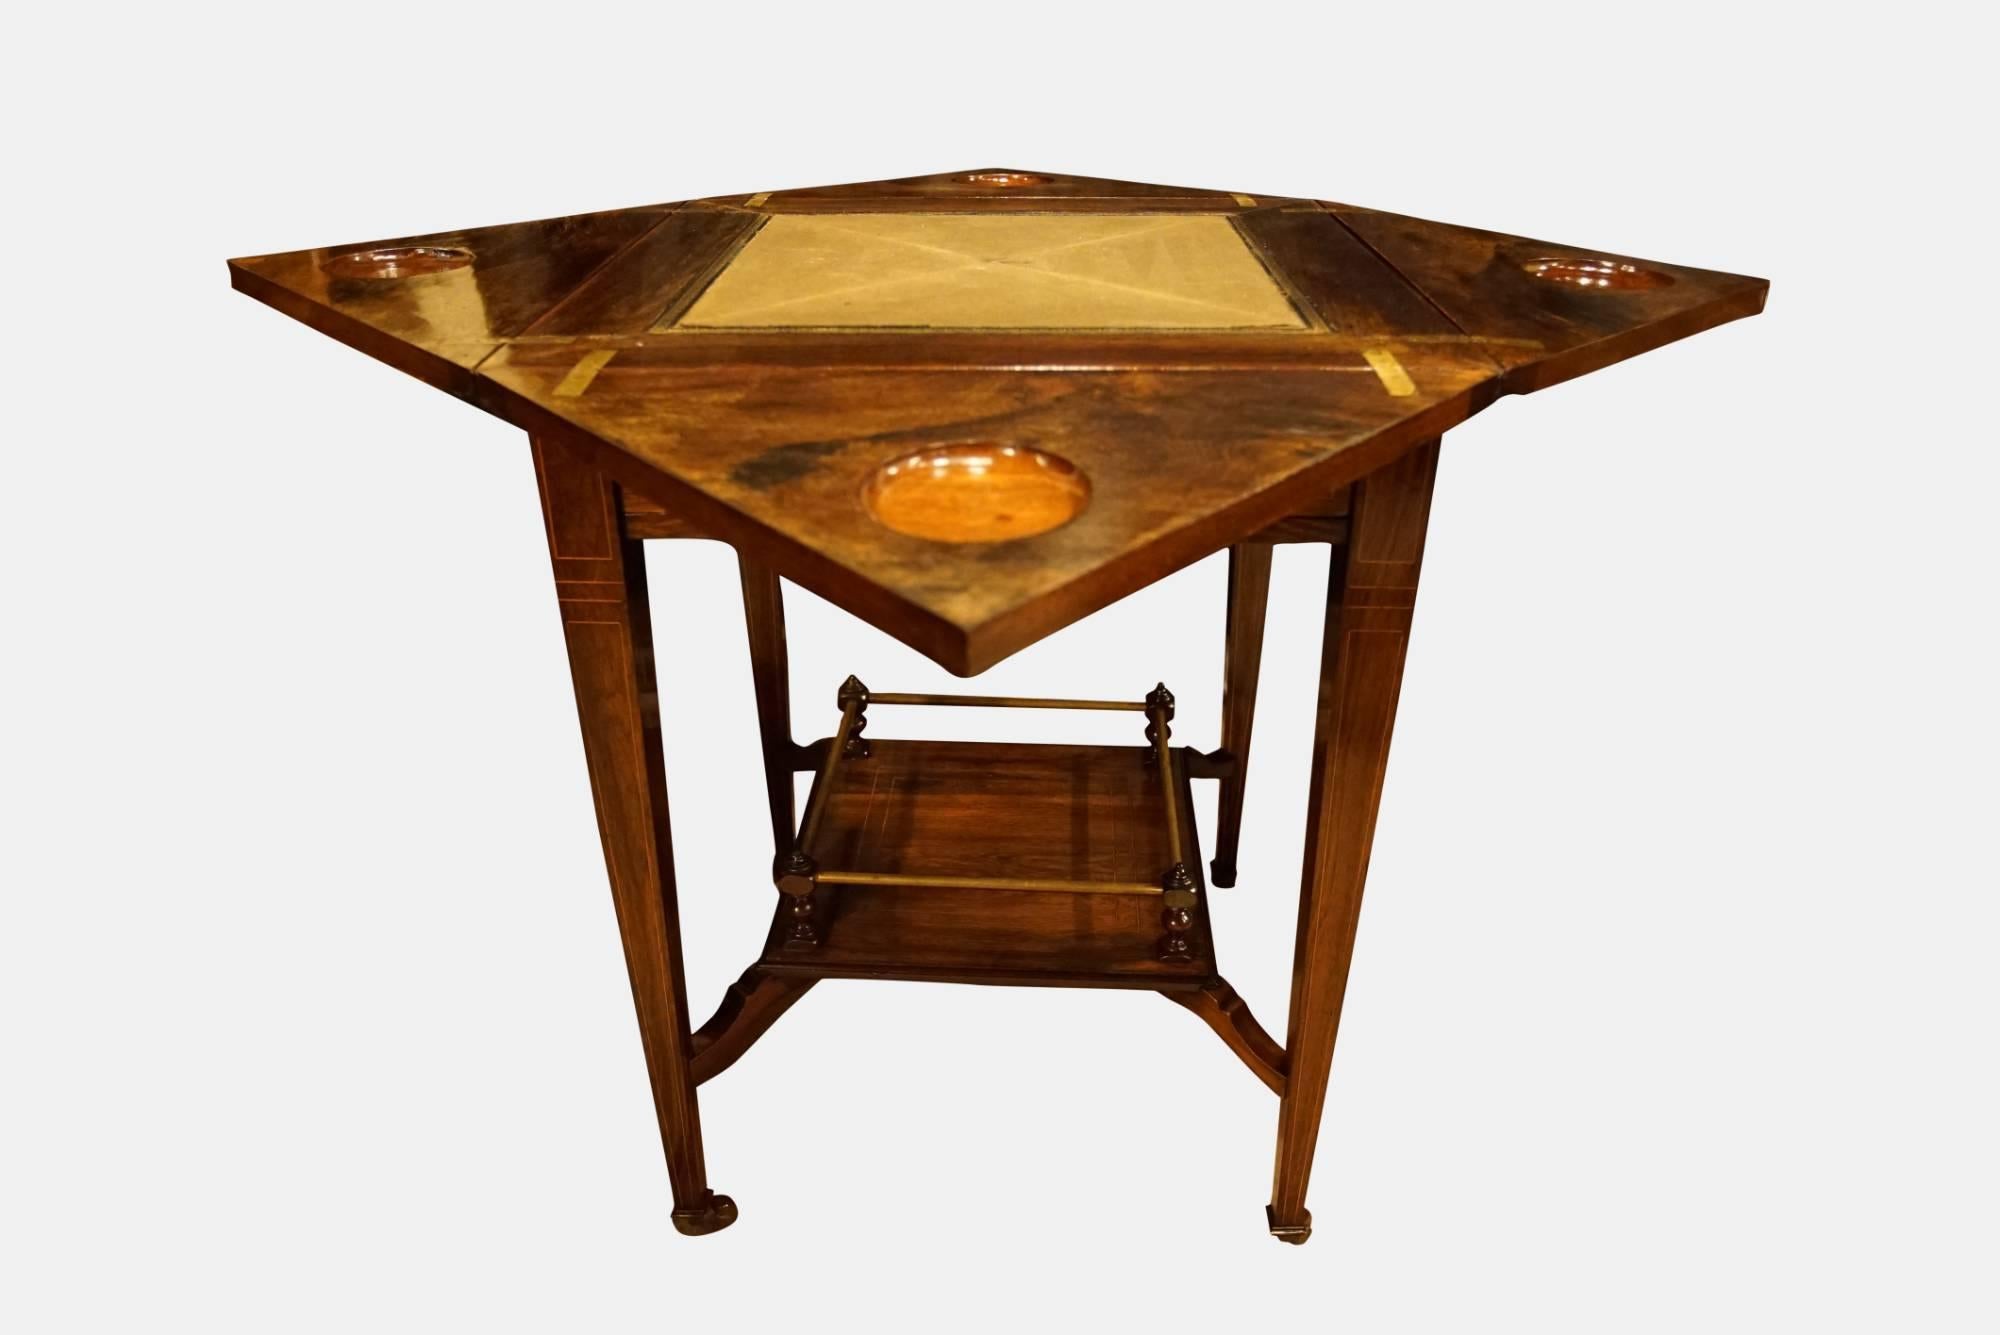 A rosewood and inlay envelope card or games table

circa 1880.